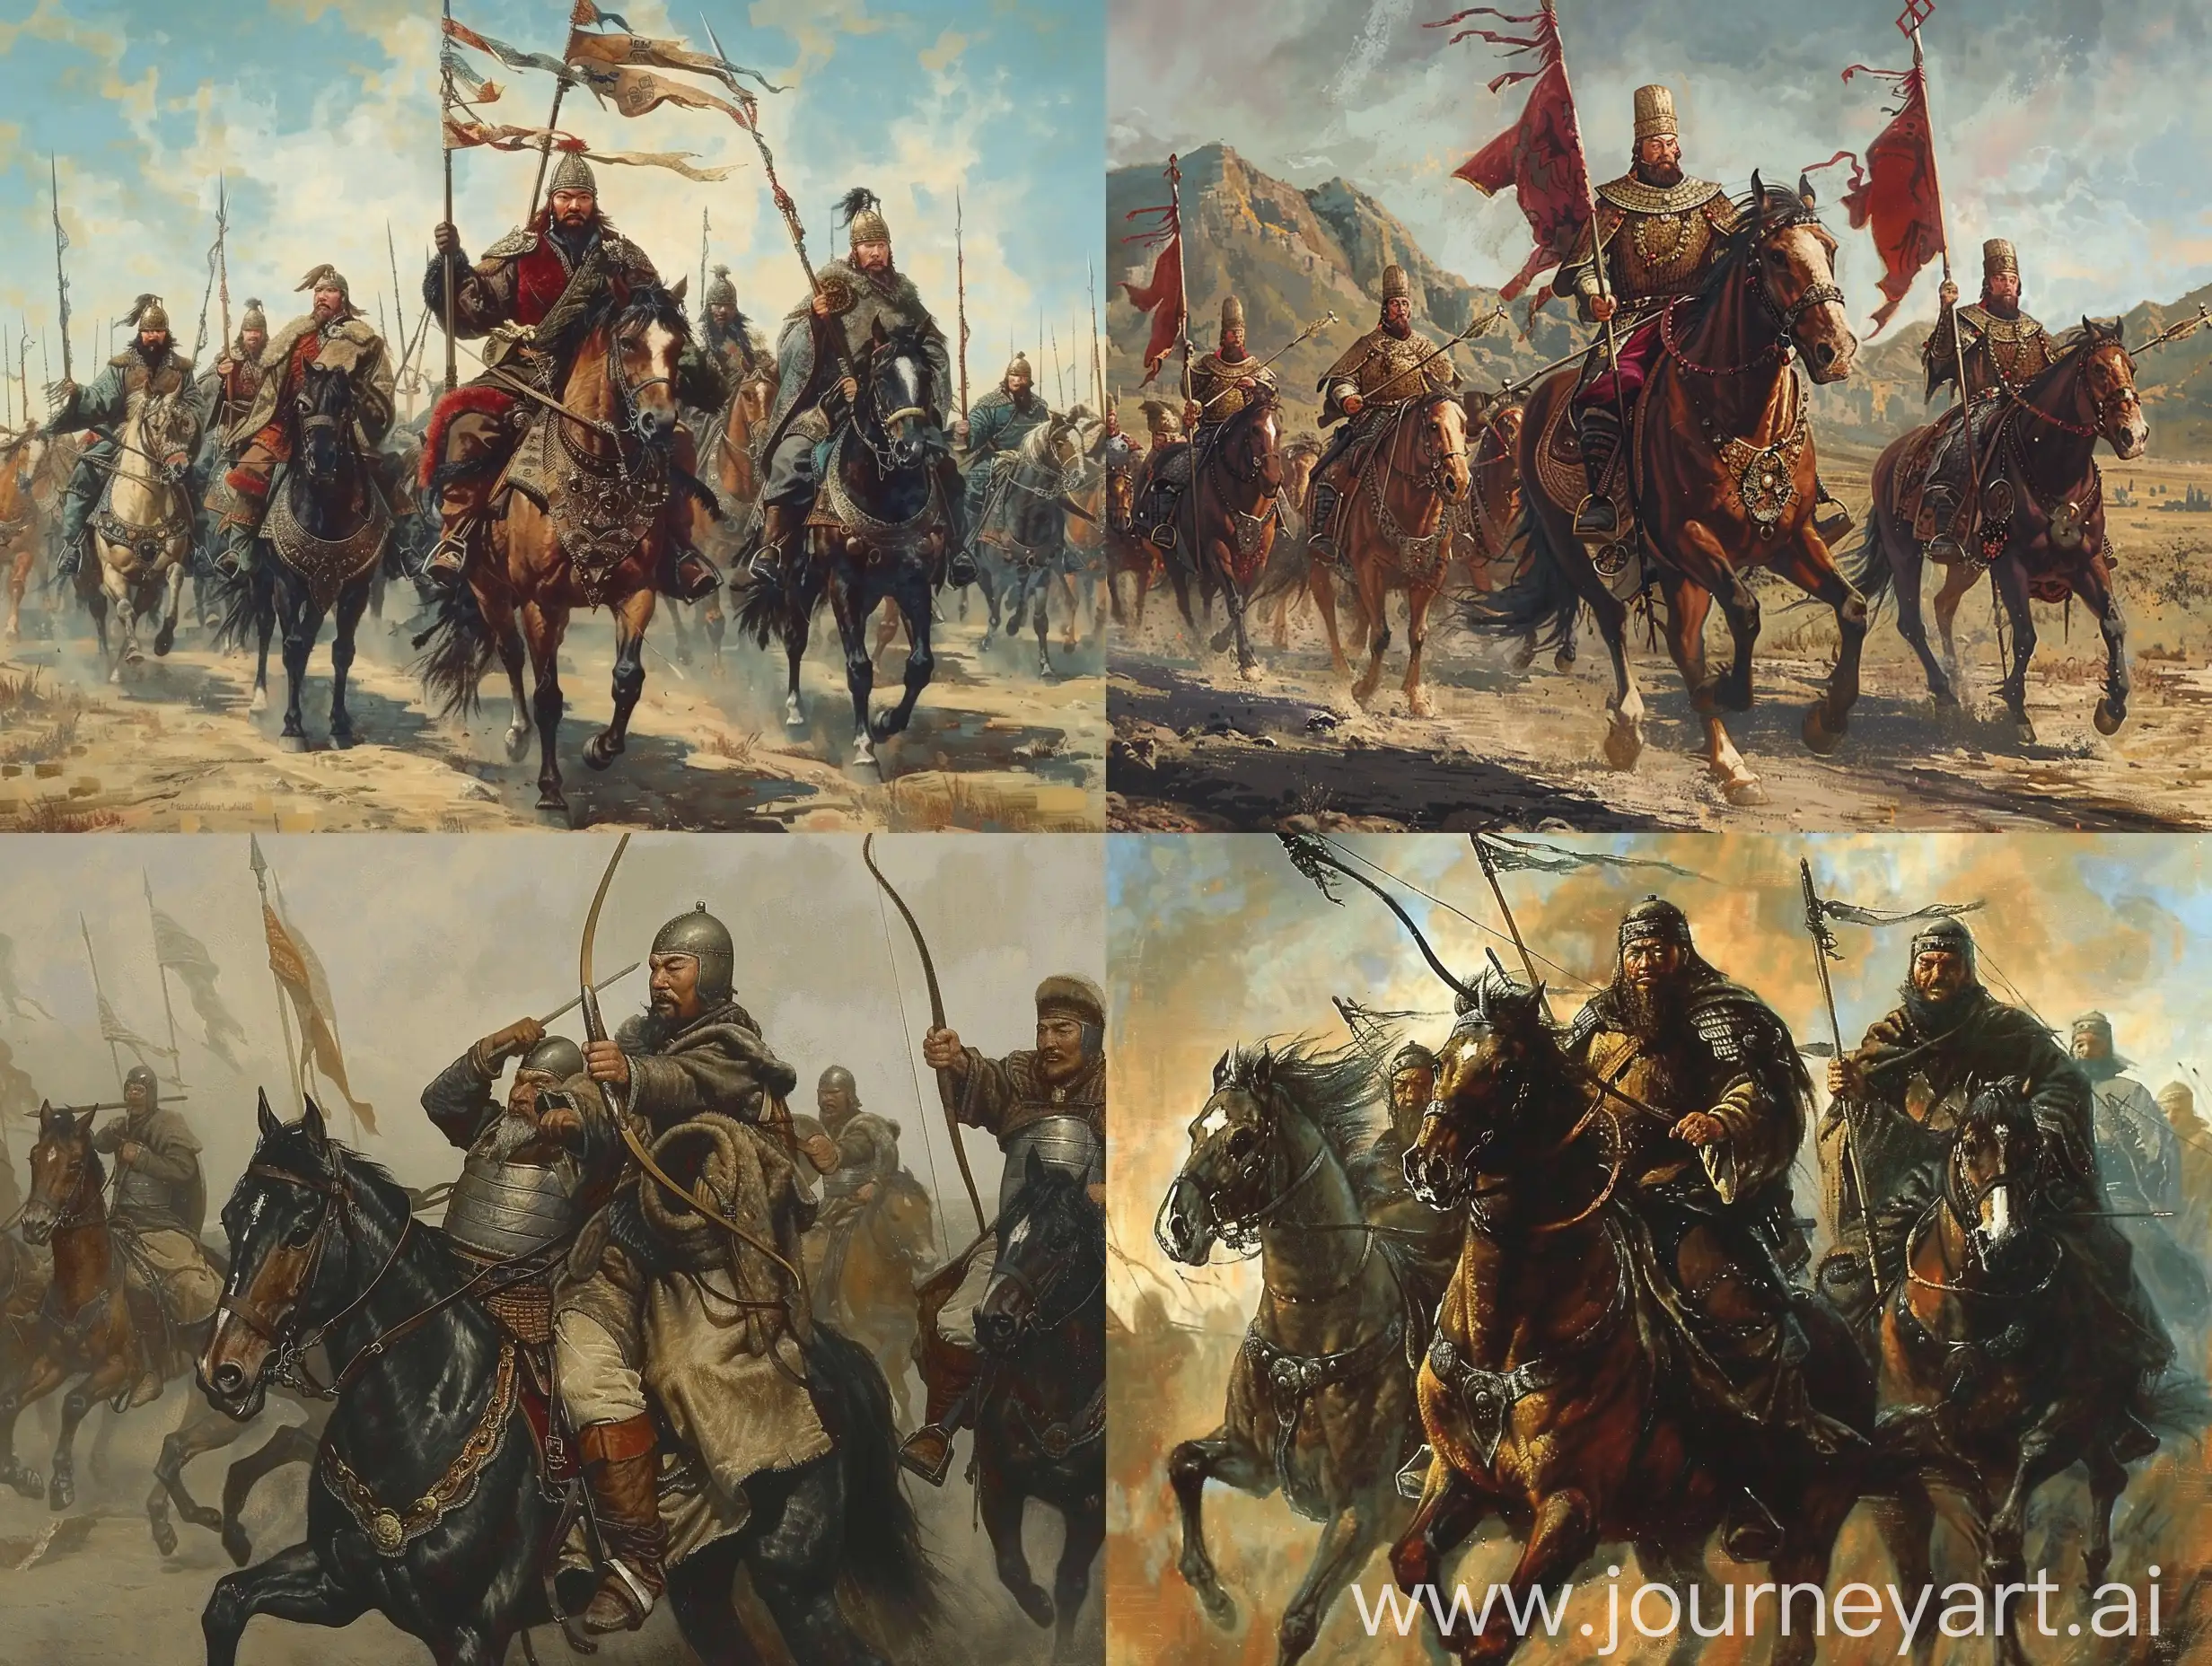 The Mongol Empire rose from the steppes and conquered vast Asian territories. Its greatness was based on the courage of warriors, the skill of horse archers and a complex hierarchical system of disciplined military organization, with each rank having its own tasks.